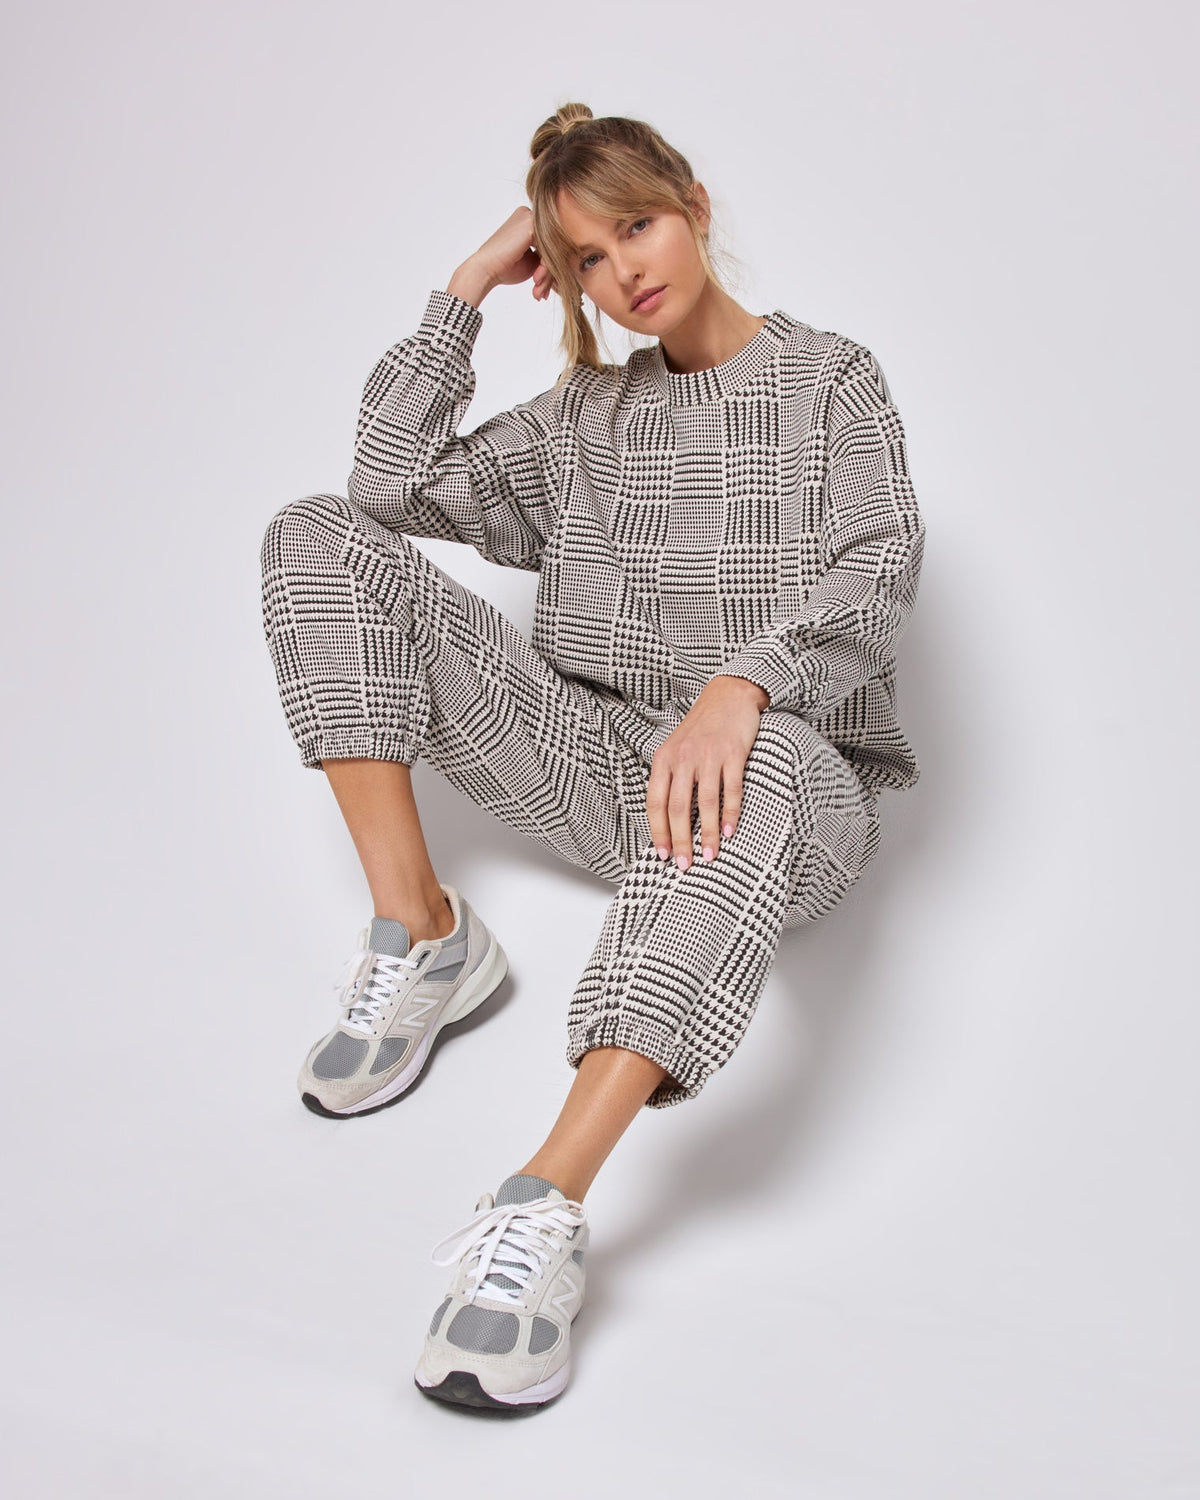 Printed Sprinter Pant Best I Ever Plaid | Model: Lura (size: S) | Hover